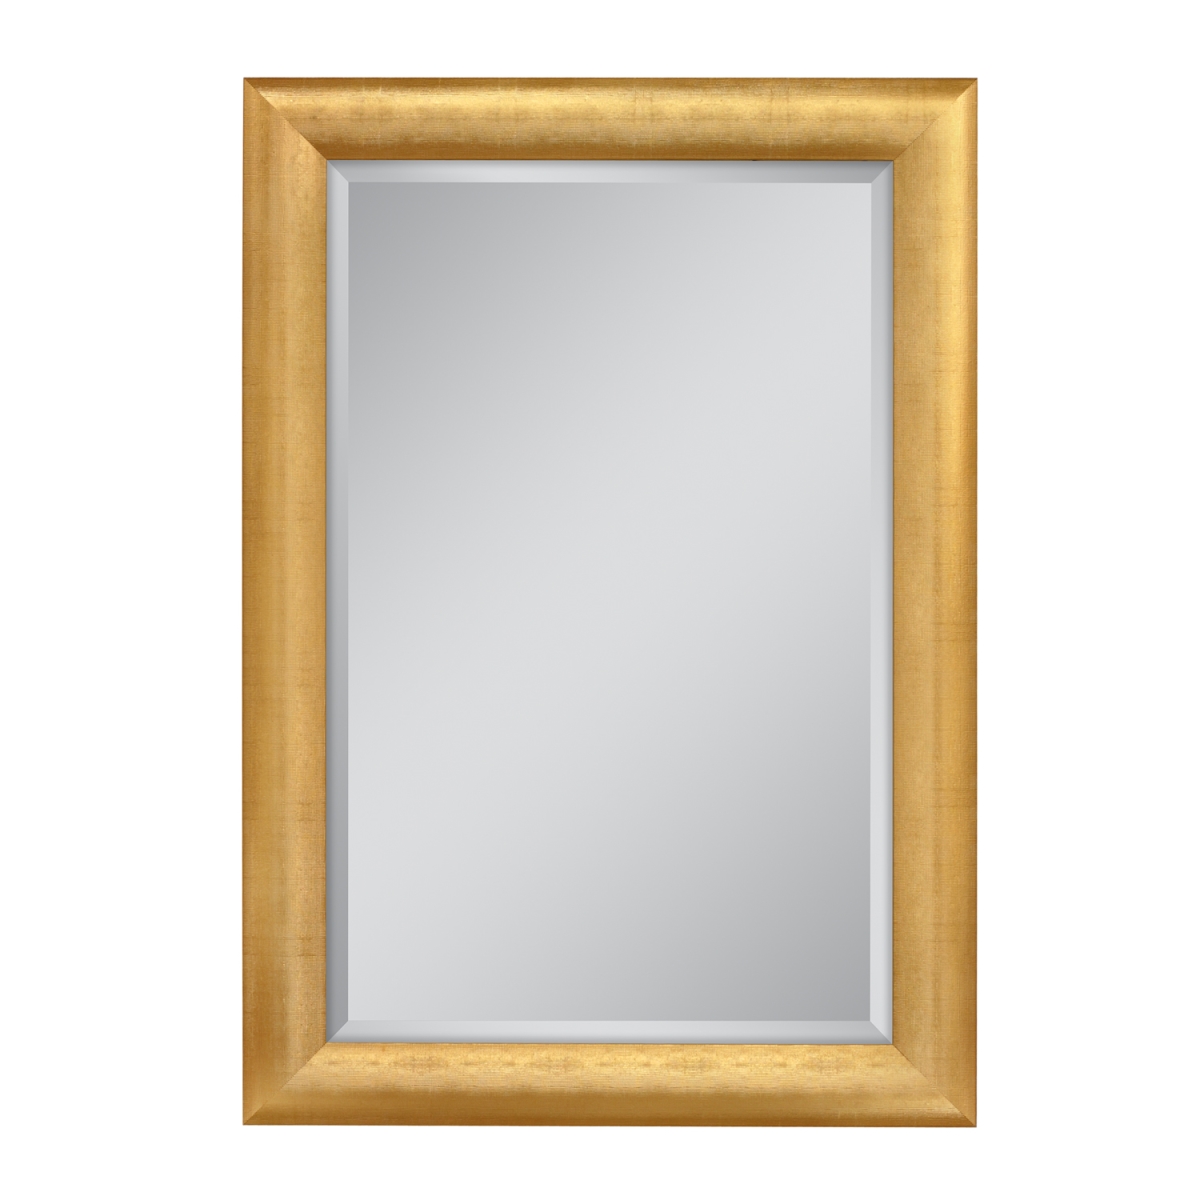 Head West 8113 30 X 42 In. Pave Weave Wall Mirror Gold